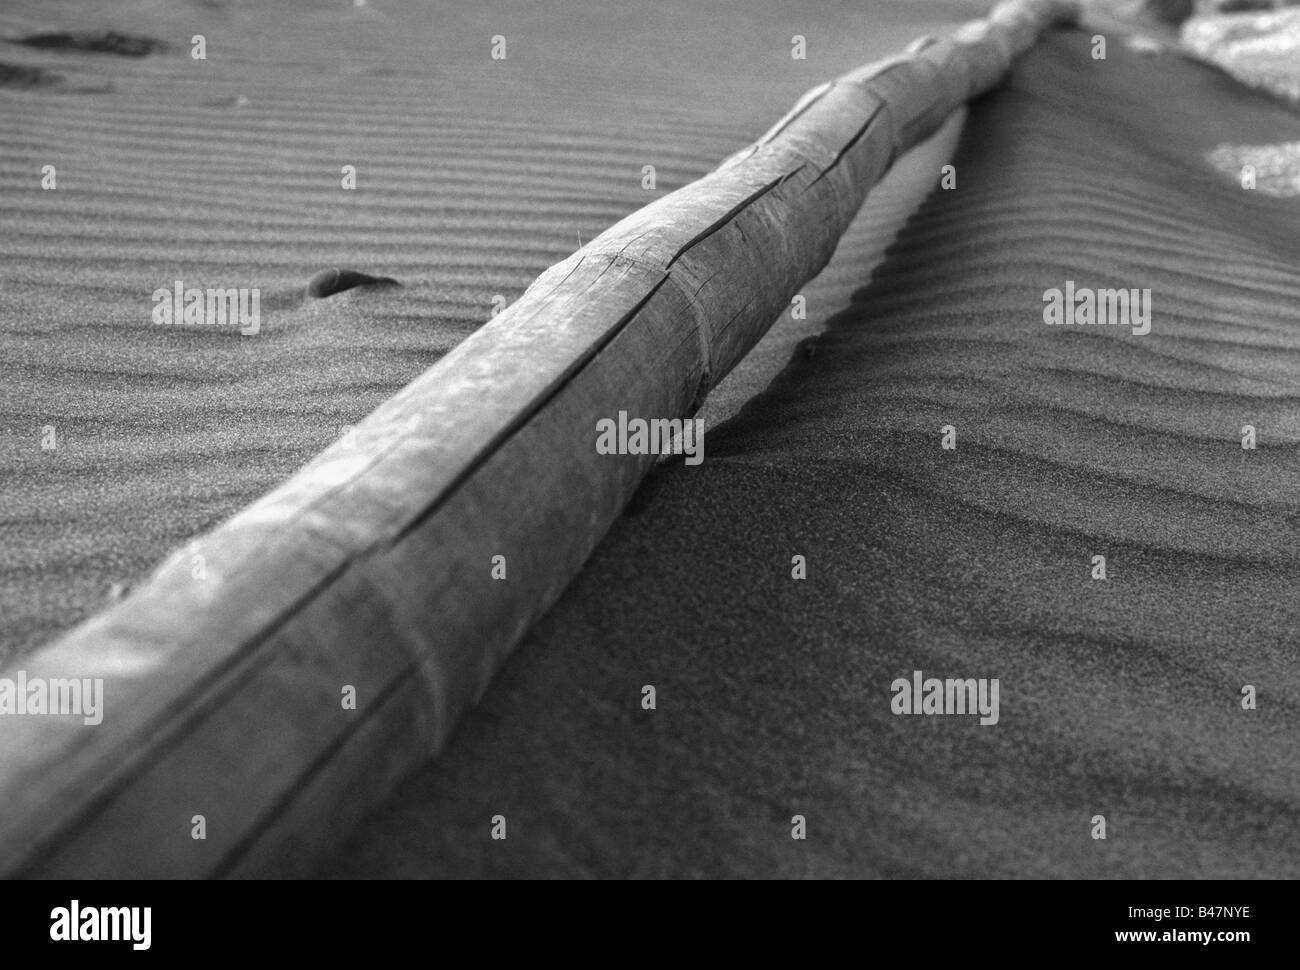 Bamboo driftwood in windblown sand at a beach. Stock Photo